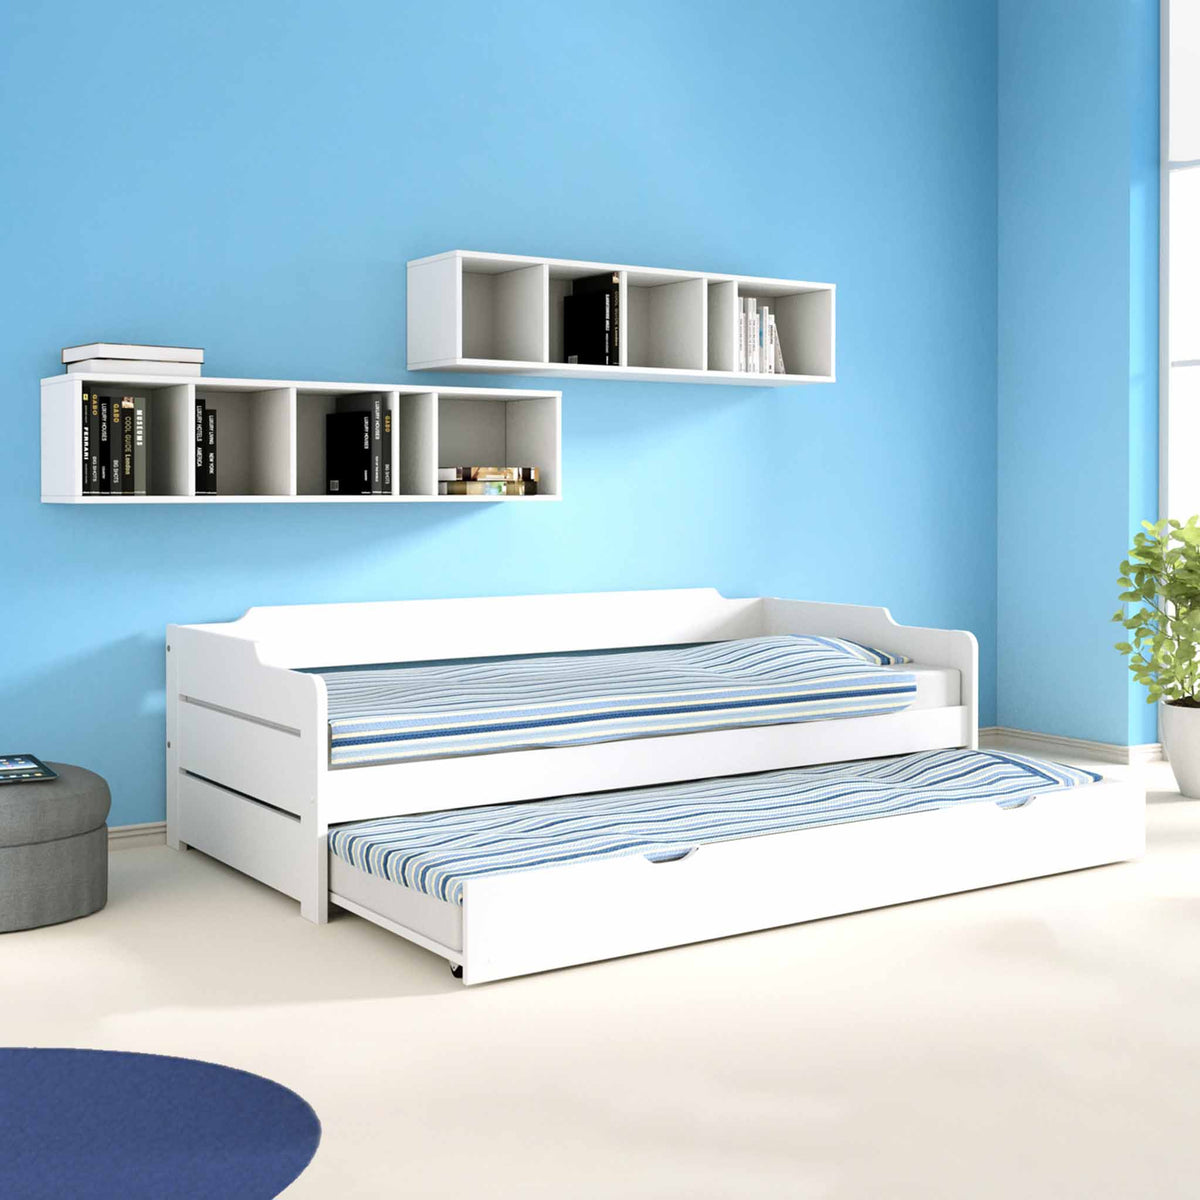 Lifestyle image of the Snooze White Wooden Bed with Trundle 